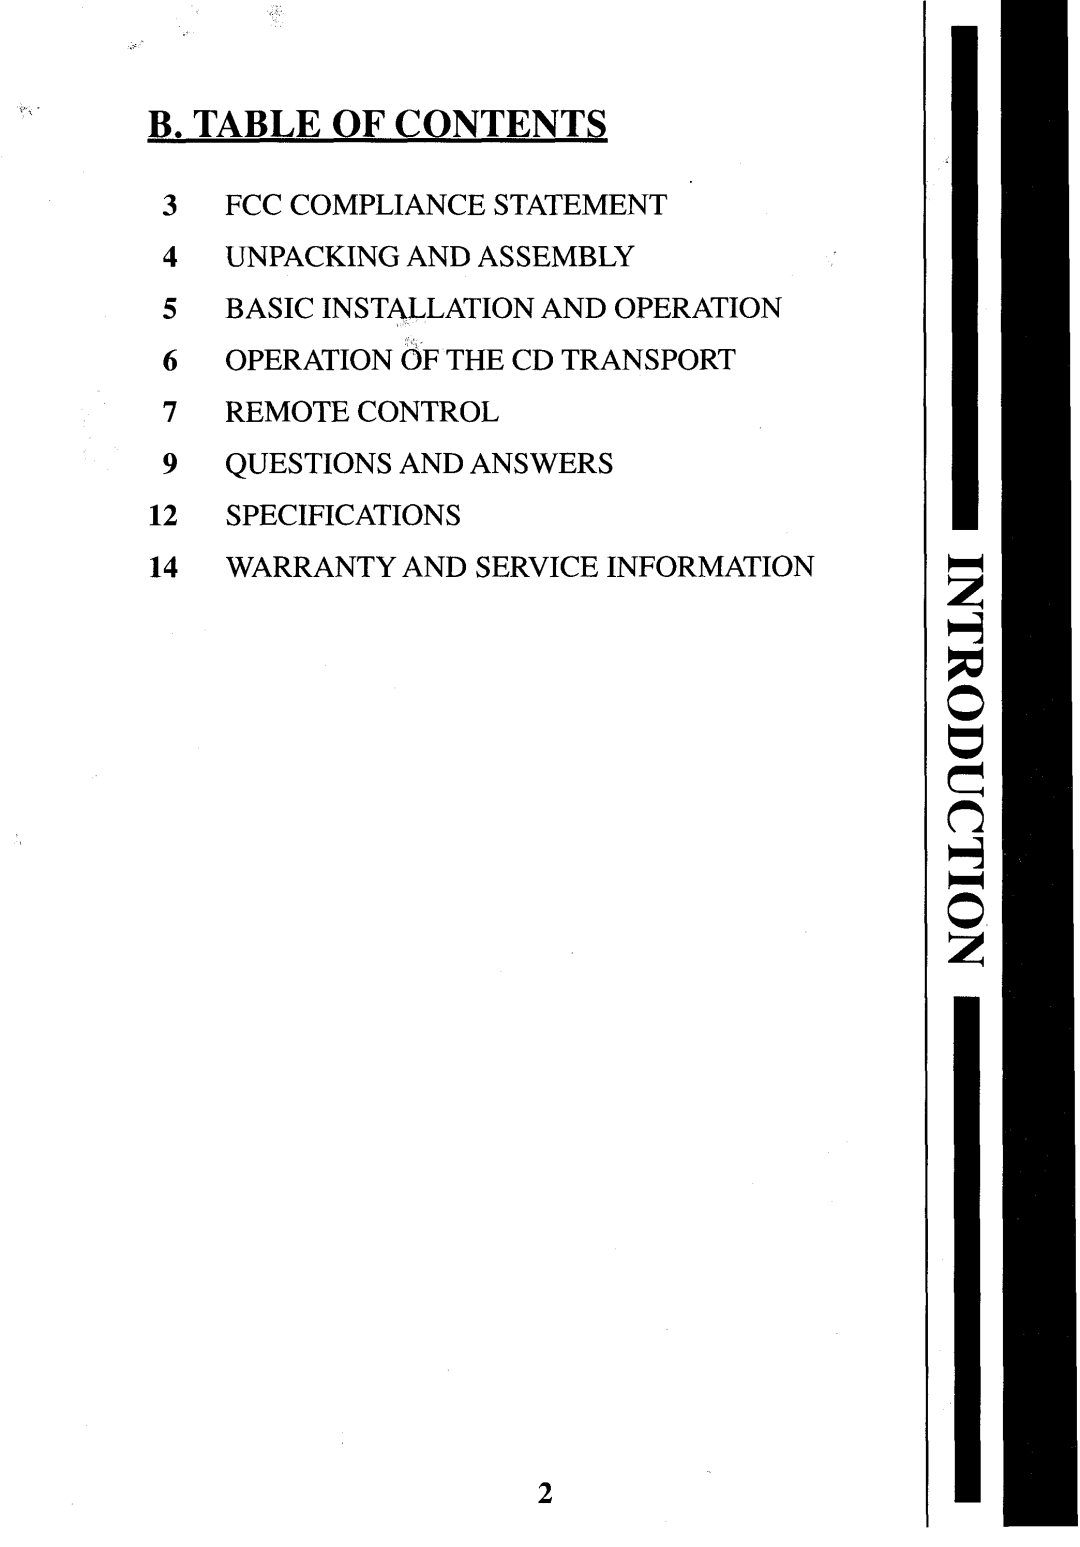 Krell Industries CD-1 manual B. Table Of Contents, 3FCC COMPLIANCE STATEMENT 4UNPACKING AND ASSEMBLY 